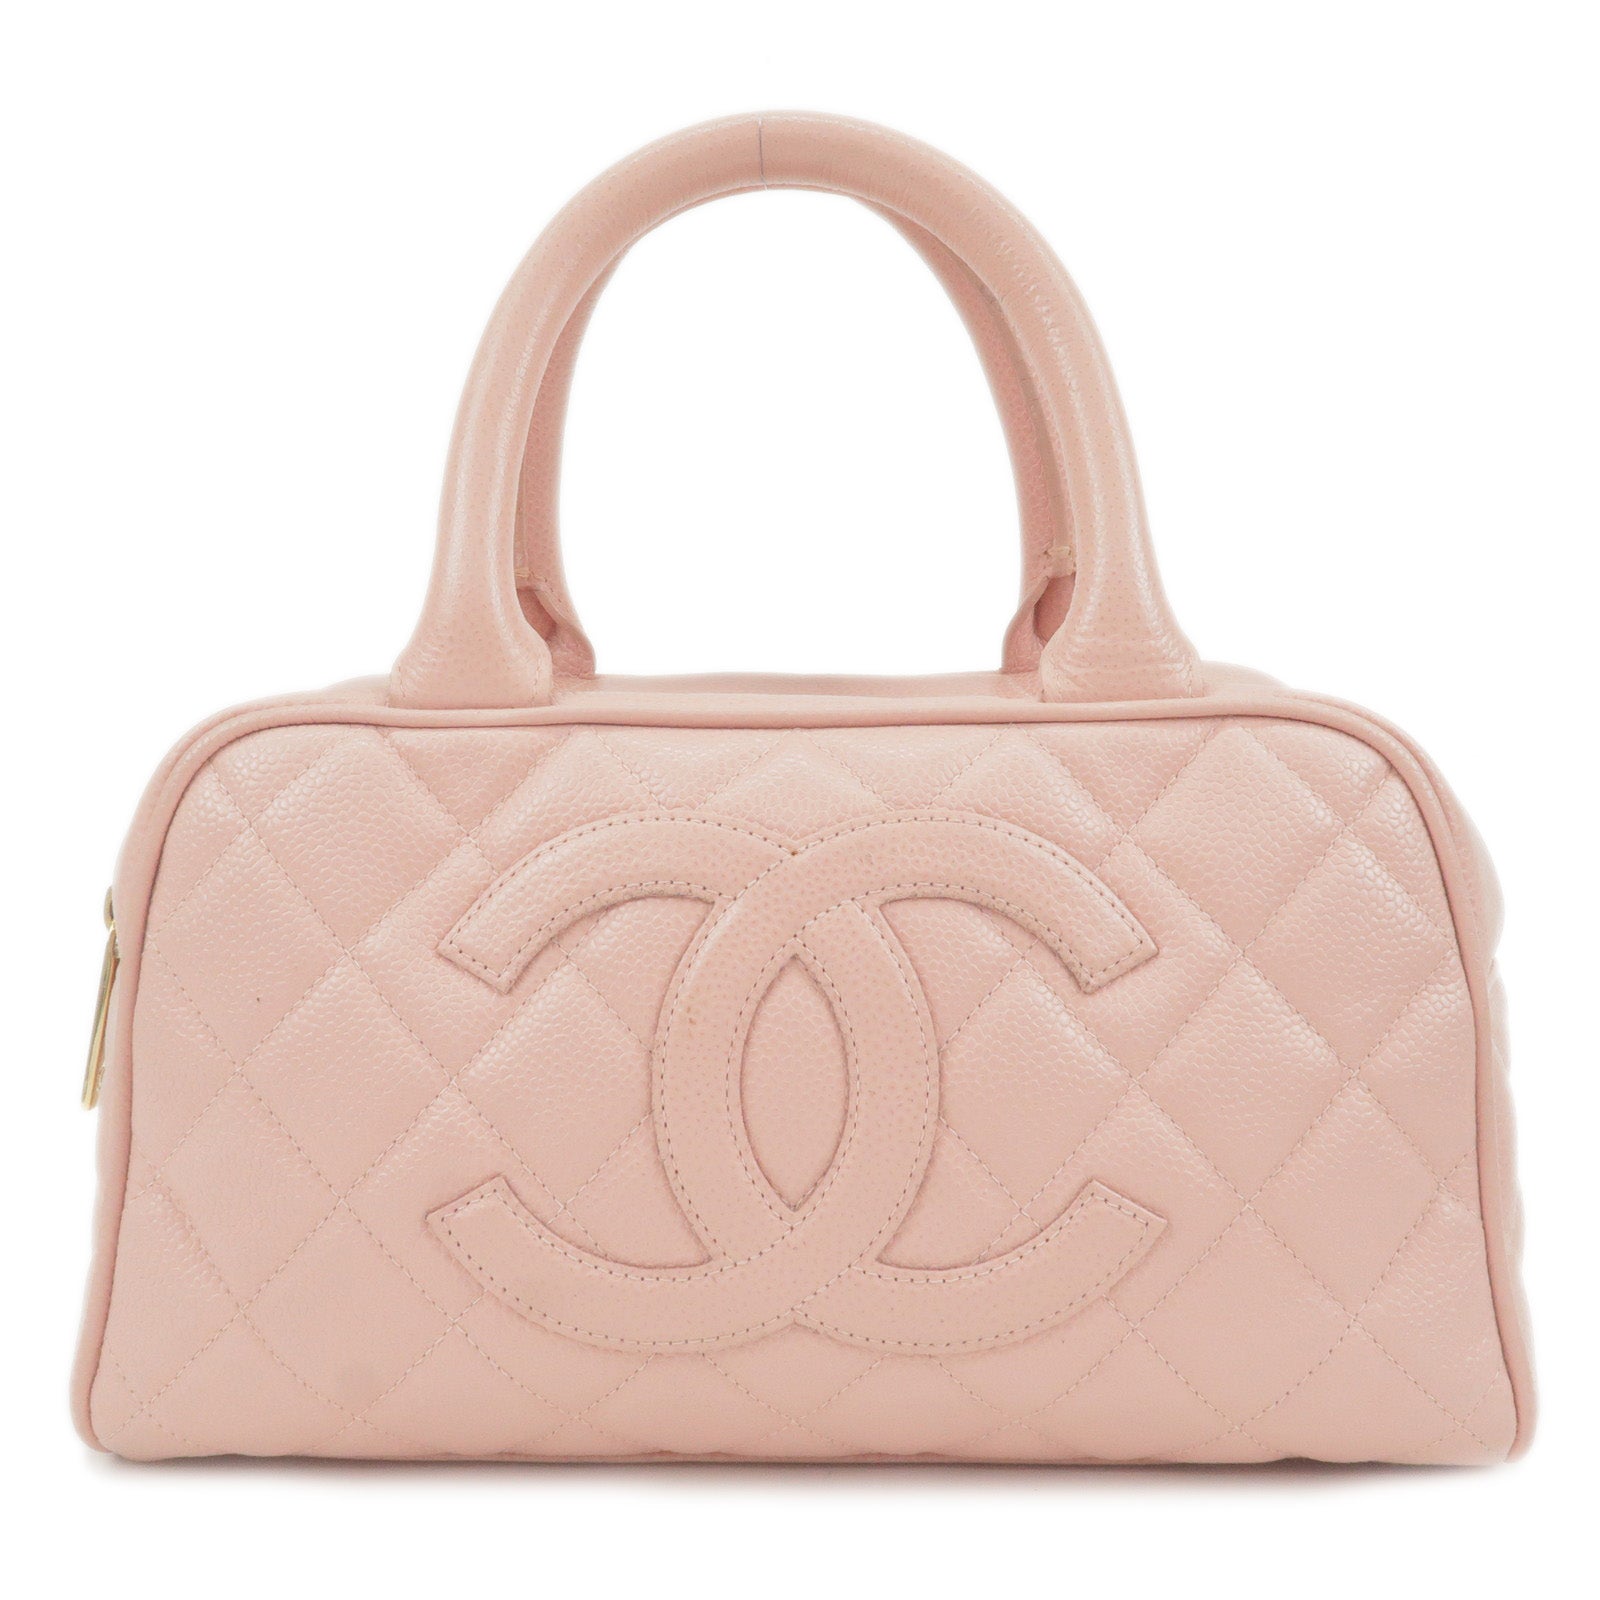 Chanel Vintage - Caviar Deauville Bowling Bag - Pink - Leather